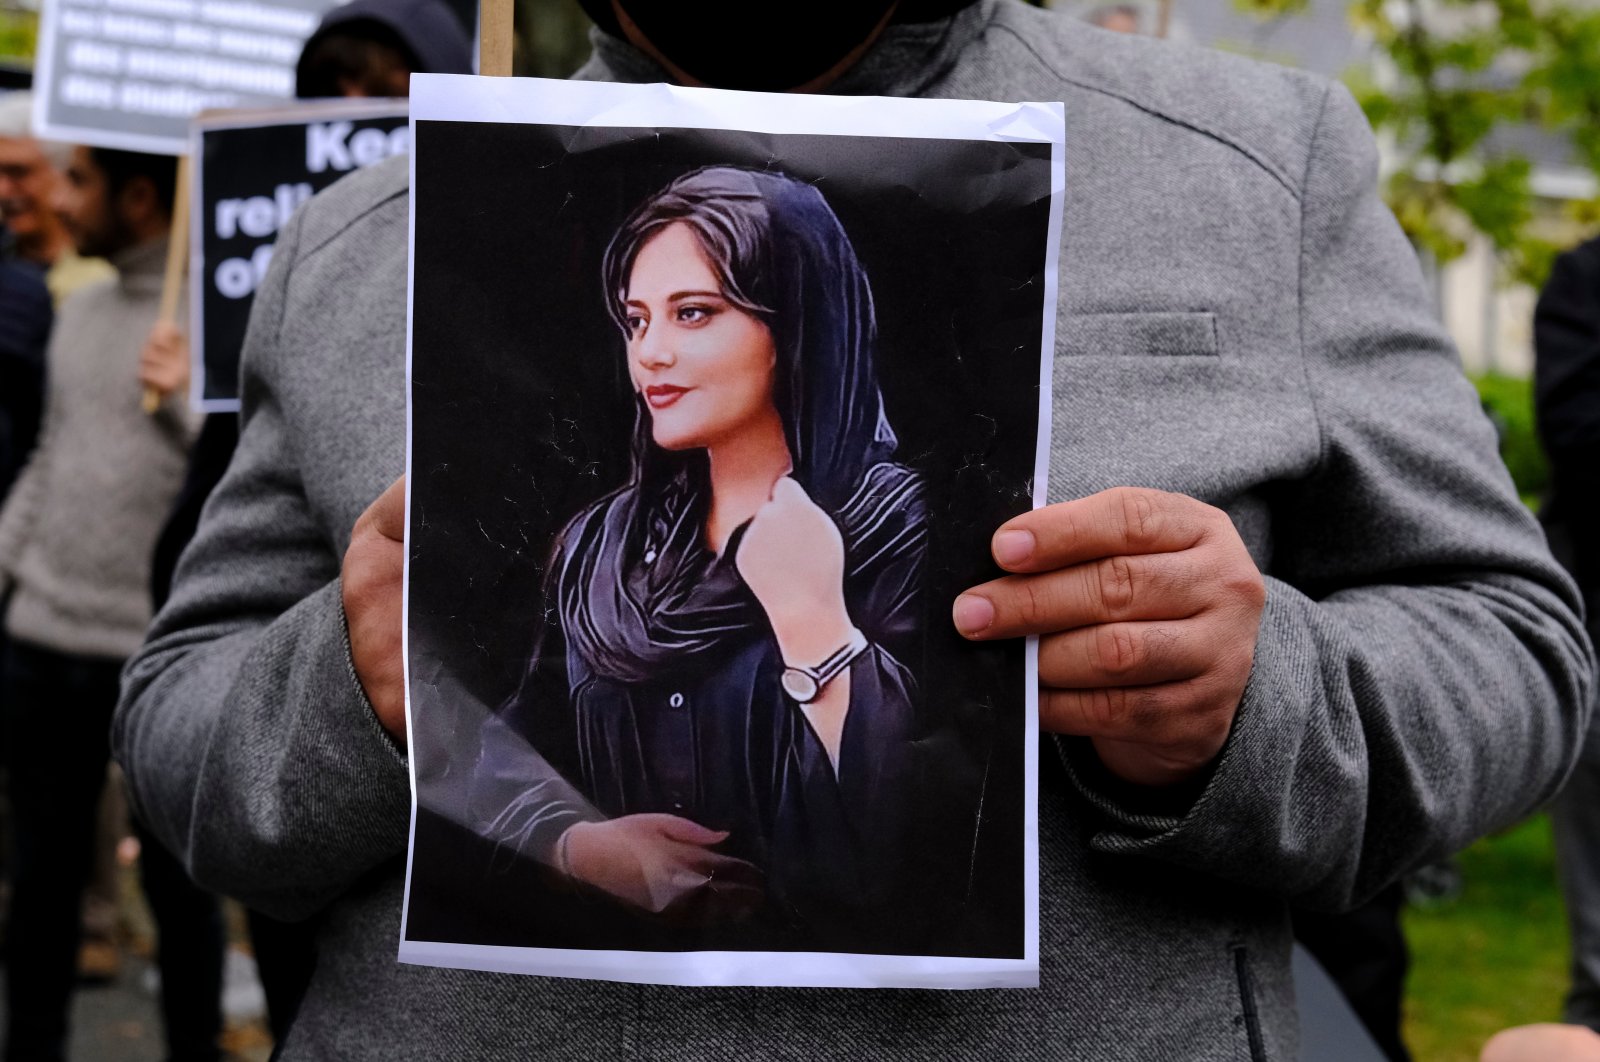 Protestors demonstrate at the Iranian Embassy in Brussels on Sept. 23, 2022, after Mahsa Amini&#039;s death. (Shutterstock Photo)